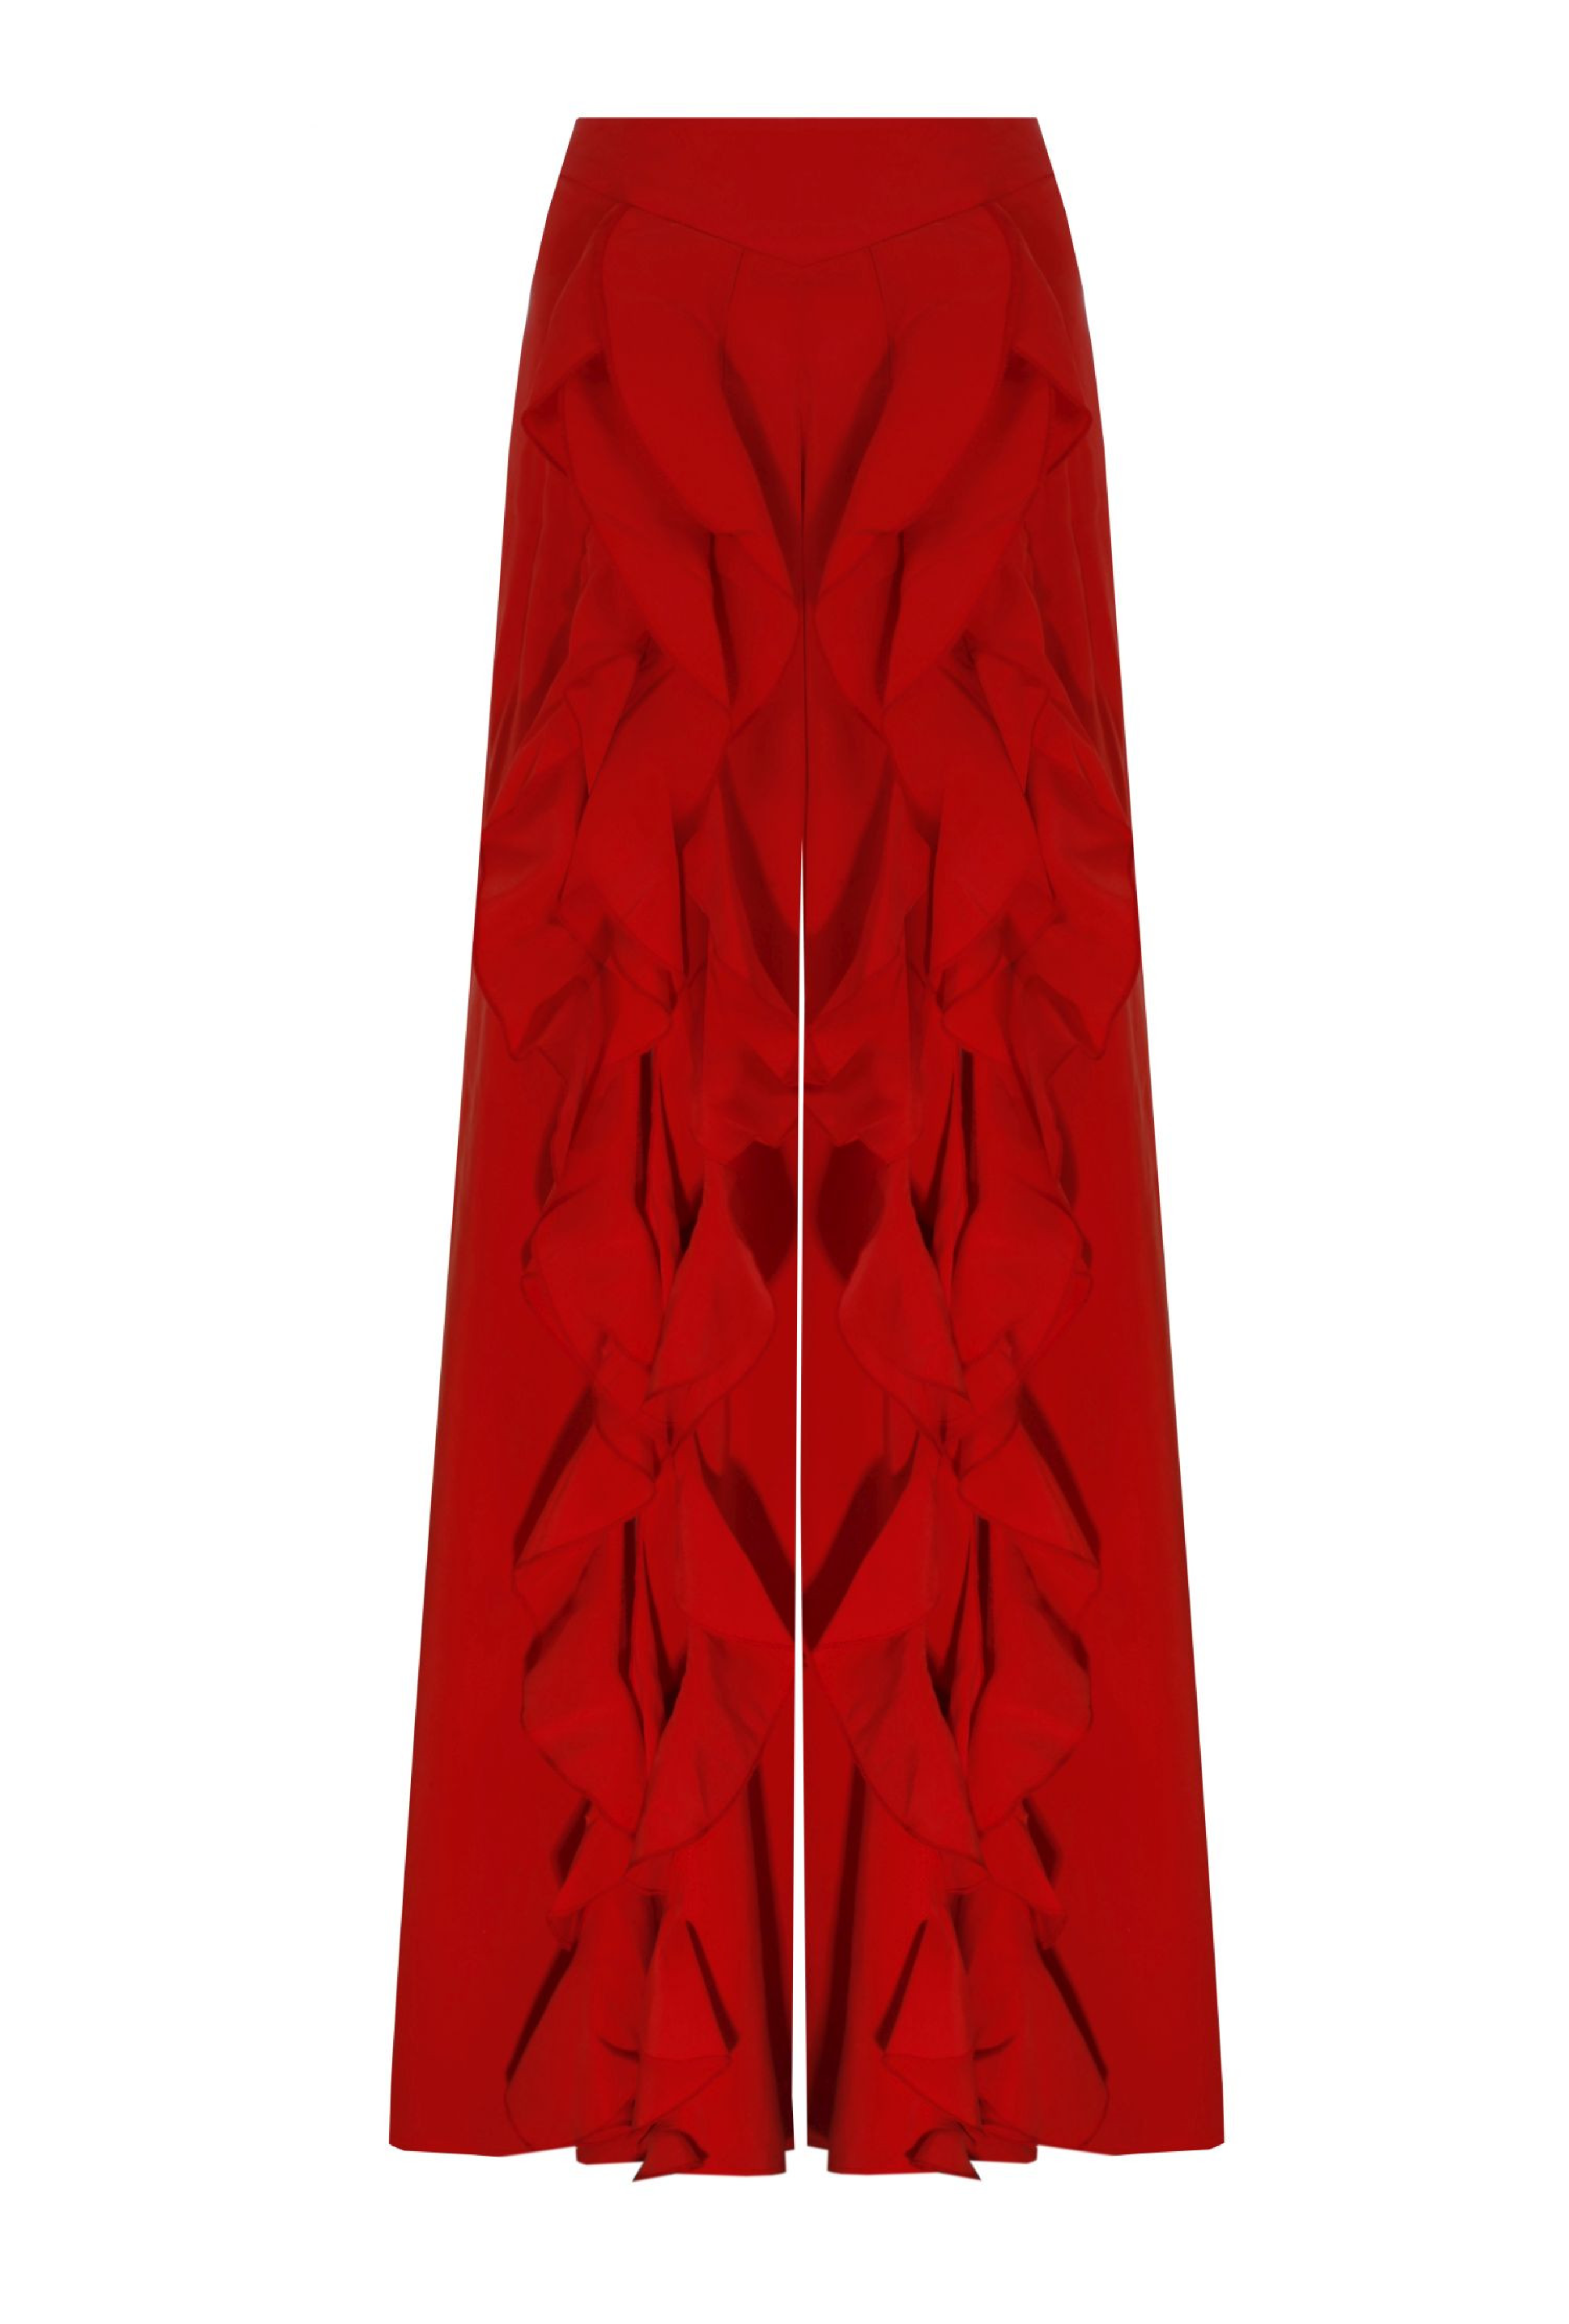 SCARLET COLORED FLARED TROUSERS